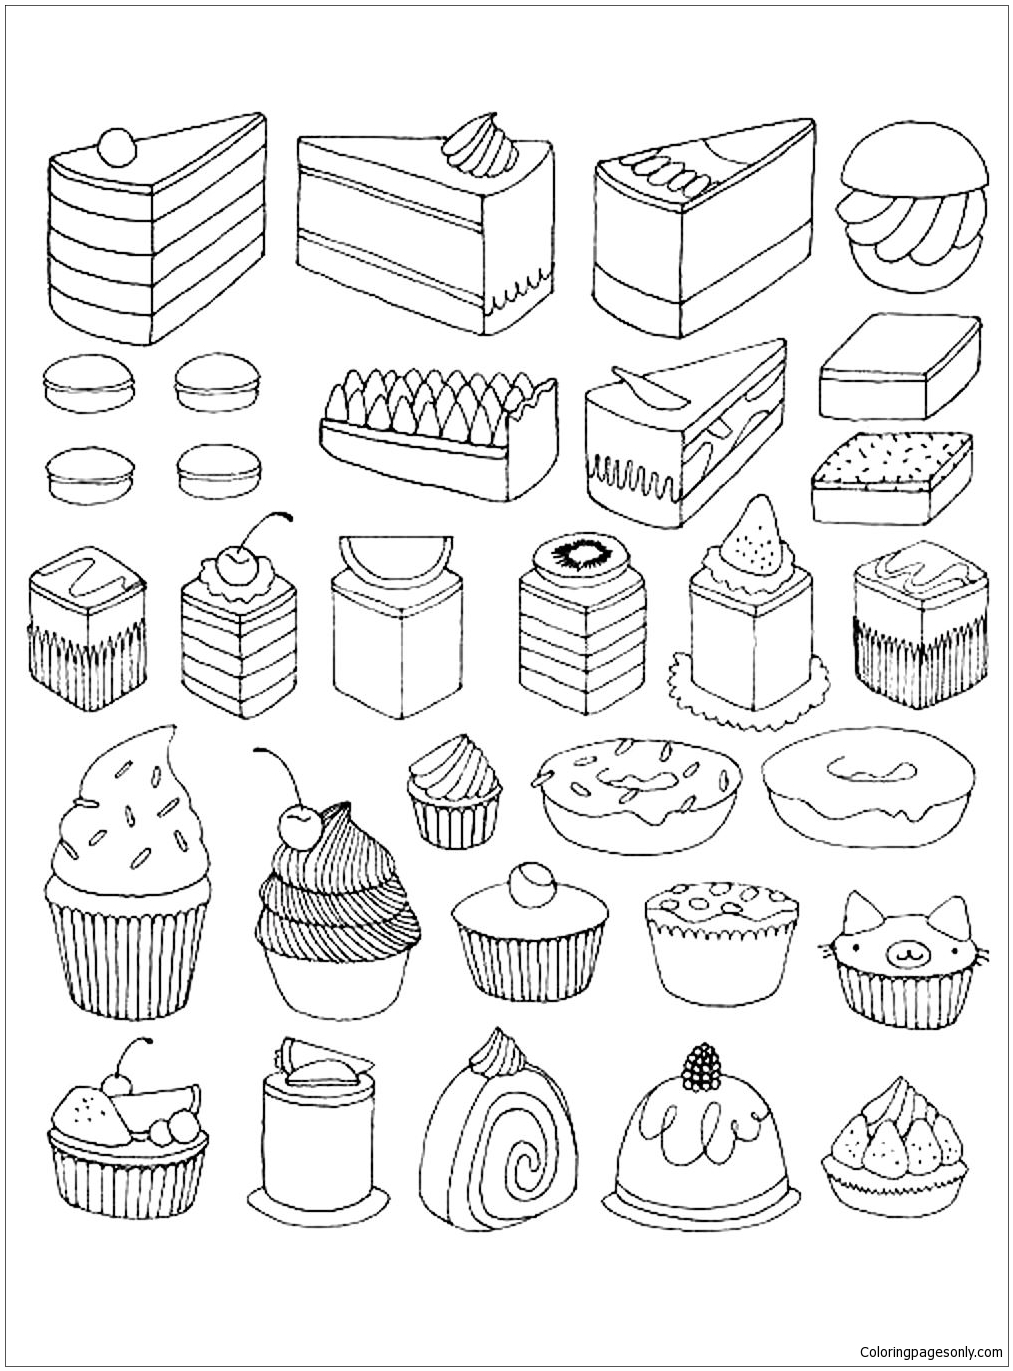 Cake Desserts Coloring Page - Free Coloring Pages Online